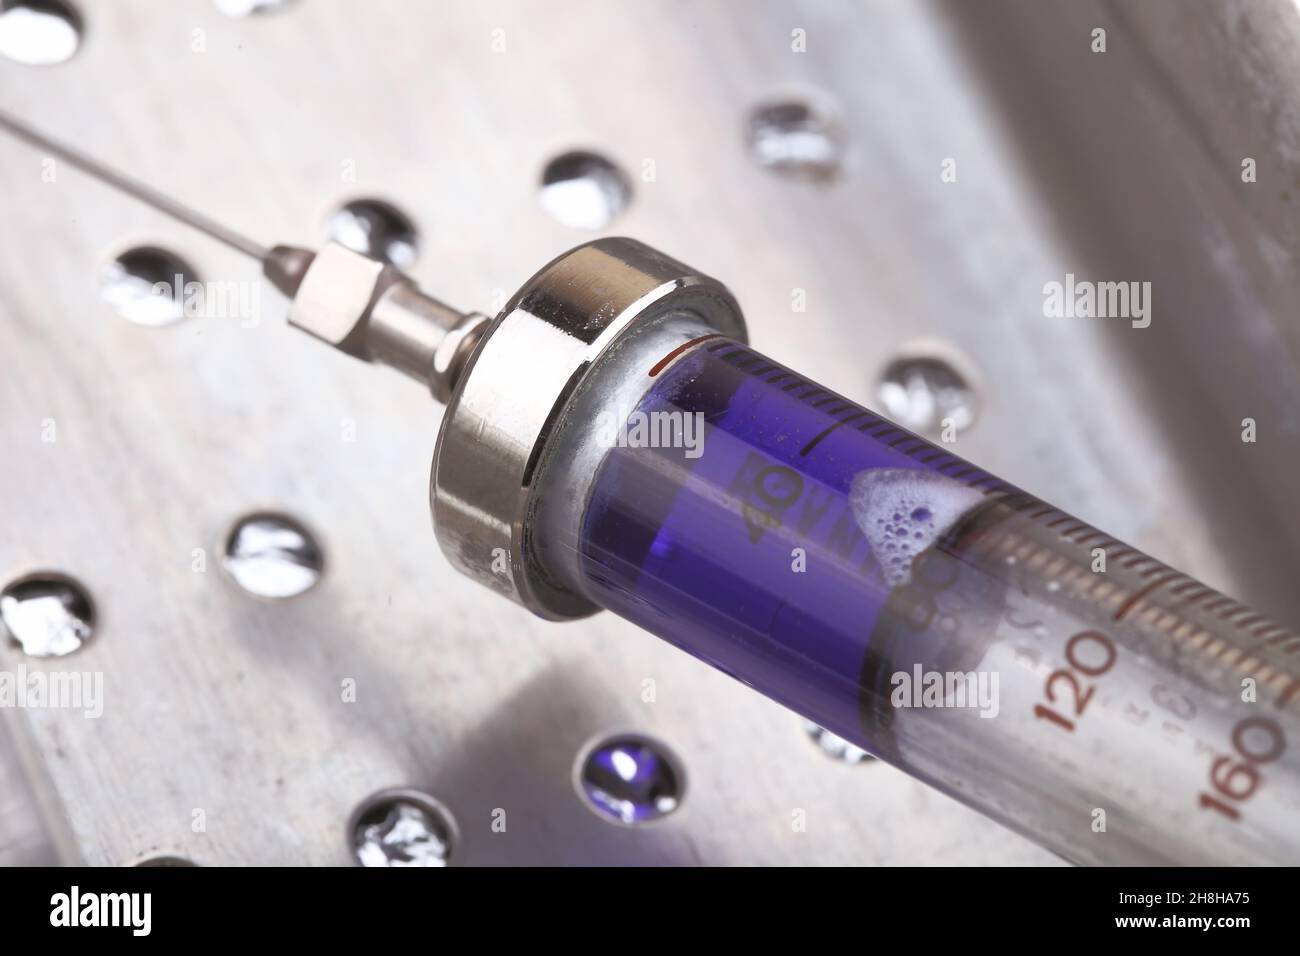 Obsolete syringe filled with blue solution ready for injecting. Stock Photo